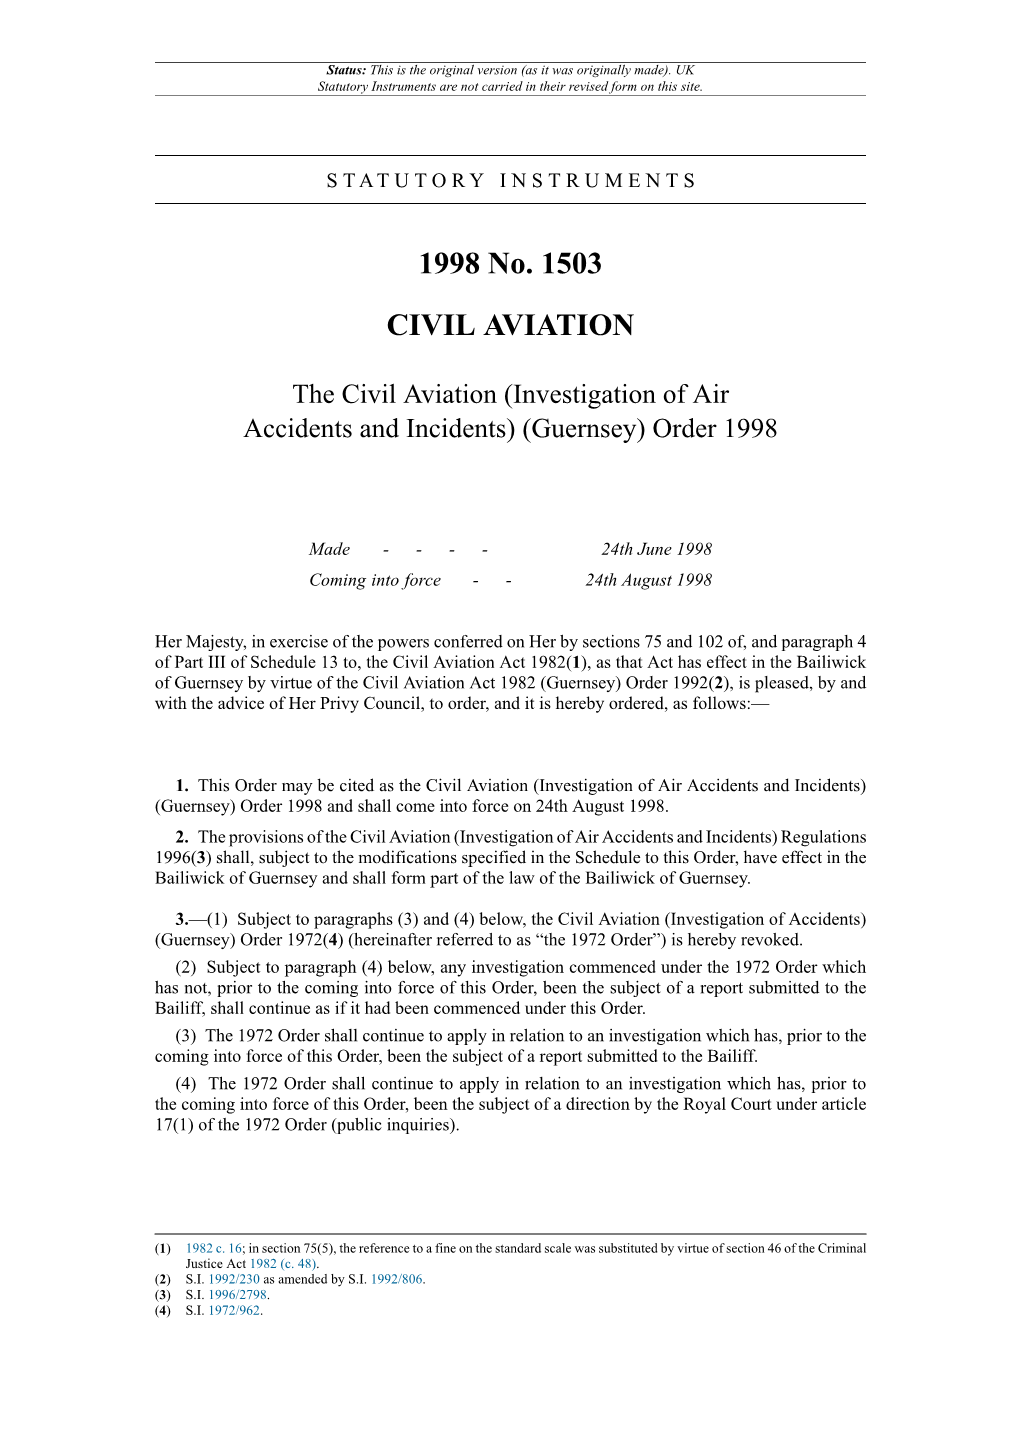 Civil Aviation (Investigation of Air Accidents and Incidents) (Guernsey) Order 1998